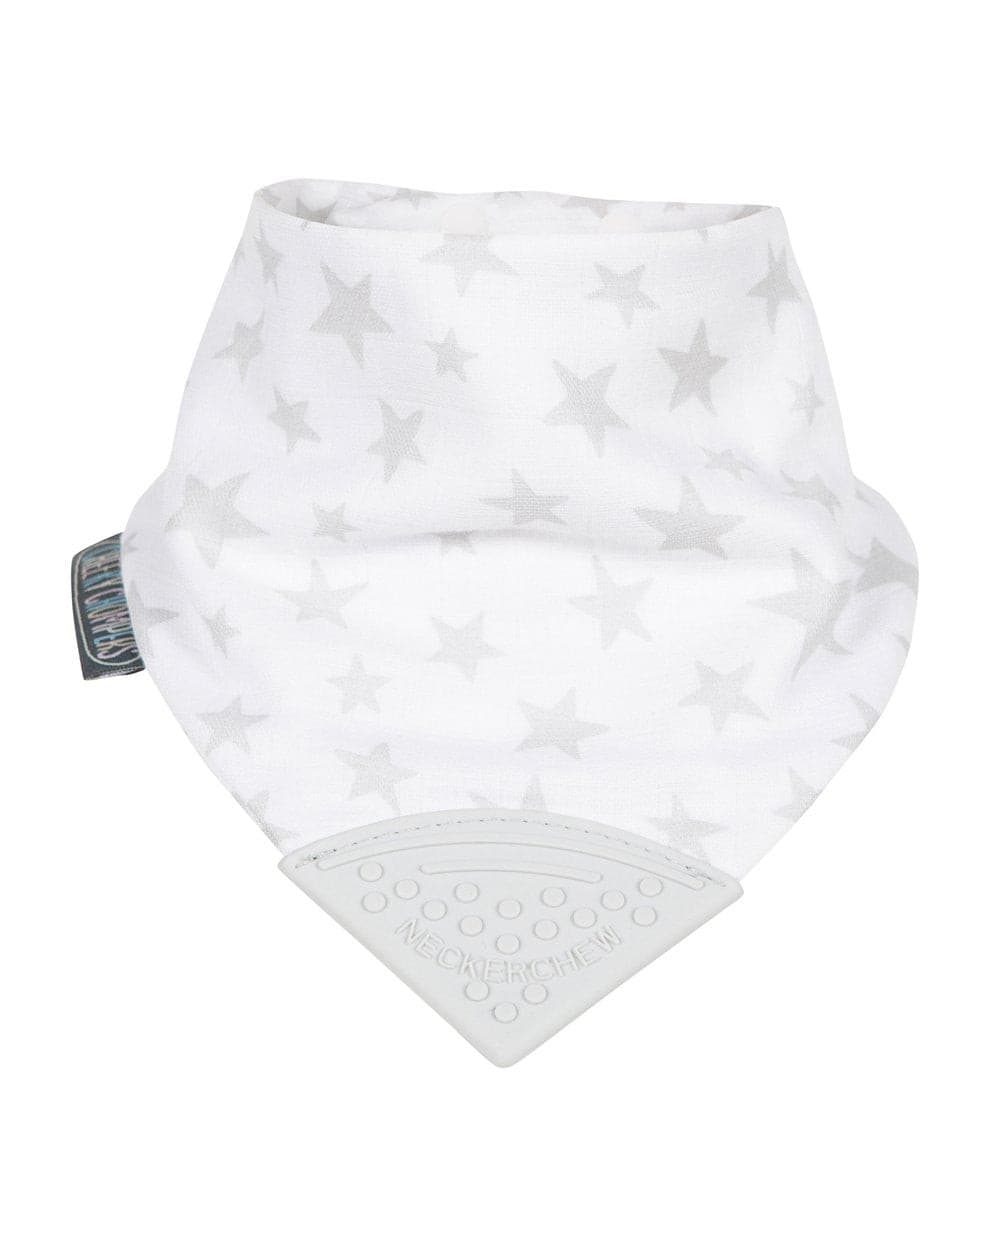 Cheeky Chompers Dribble Bandana Bibs with Teether Attached with teether 